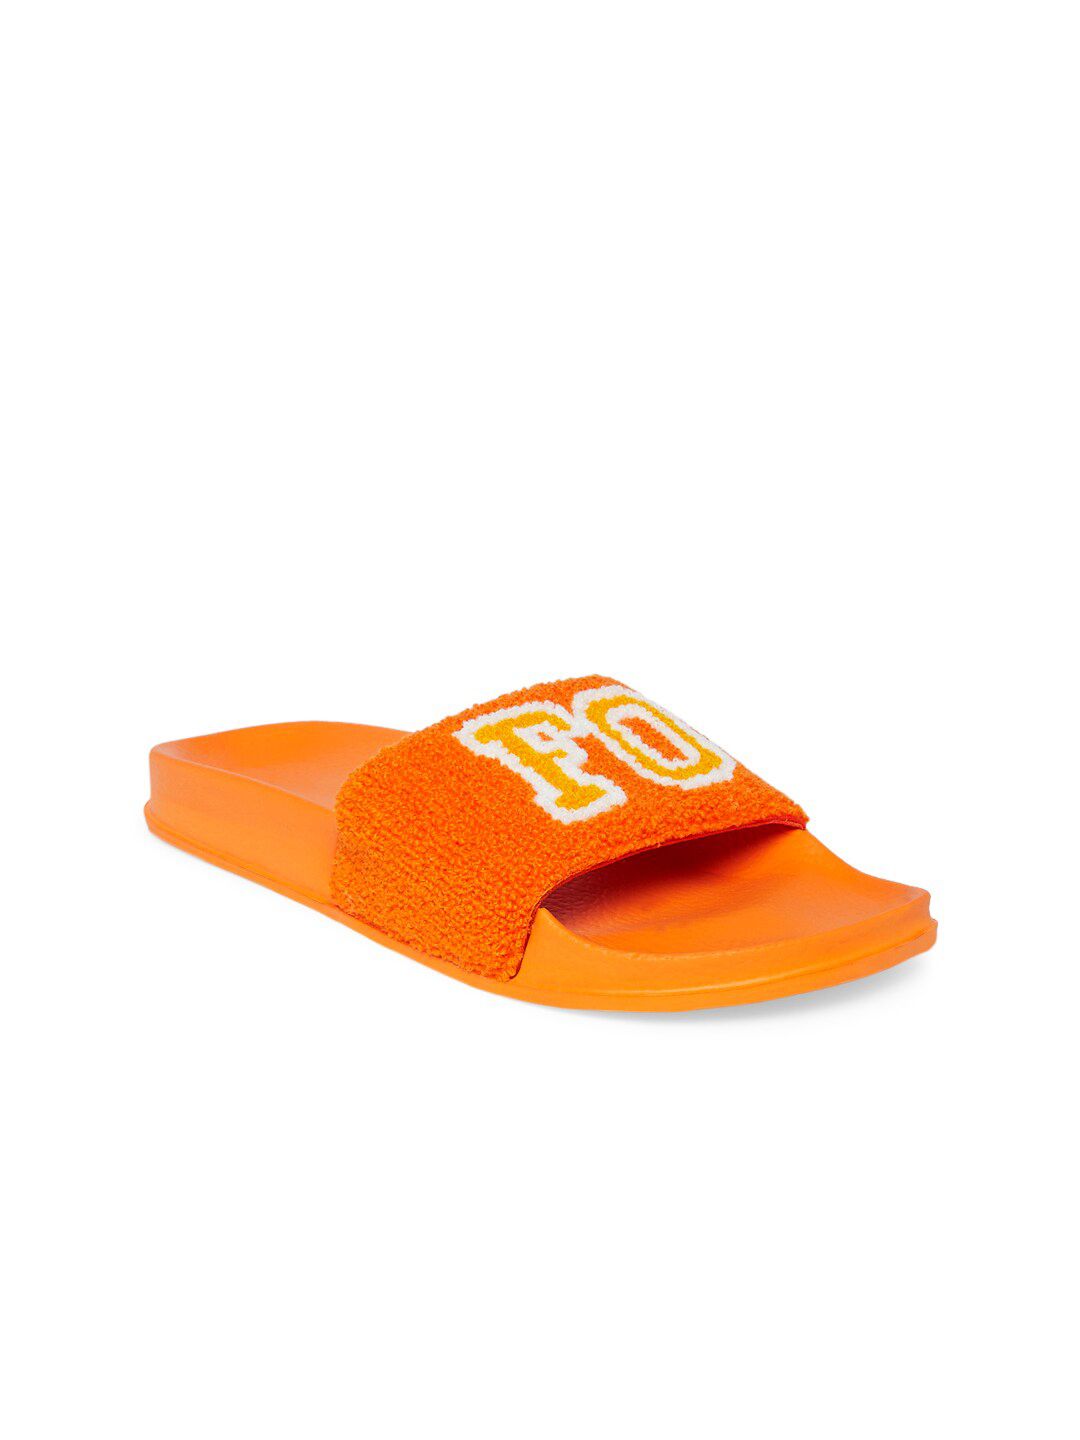 Forever Glam by Pantaloons Women Orange & Yellow Embossed Sliders Price in India